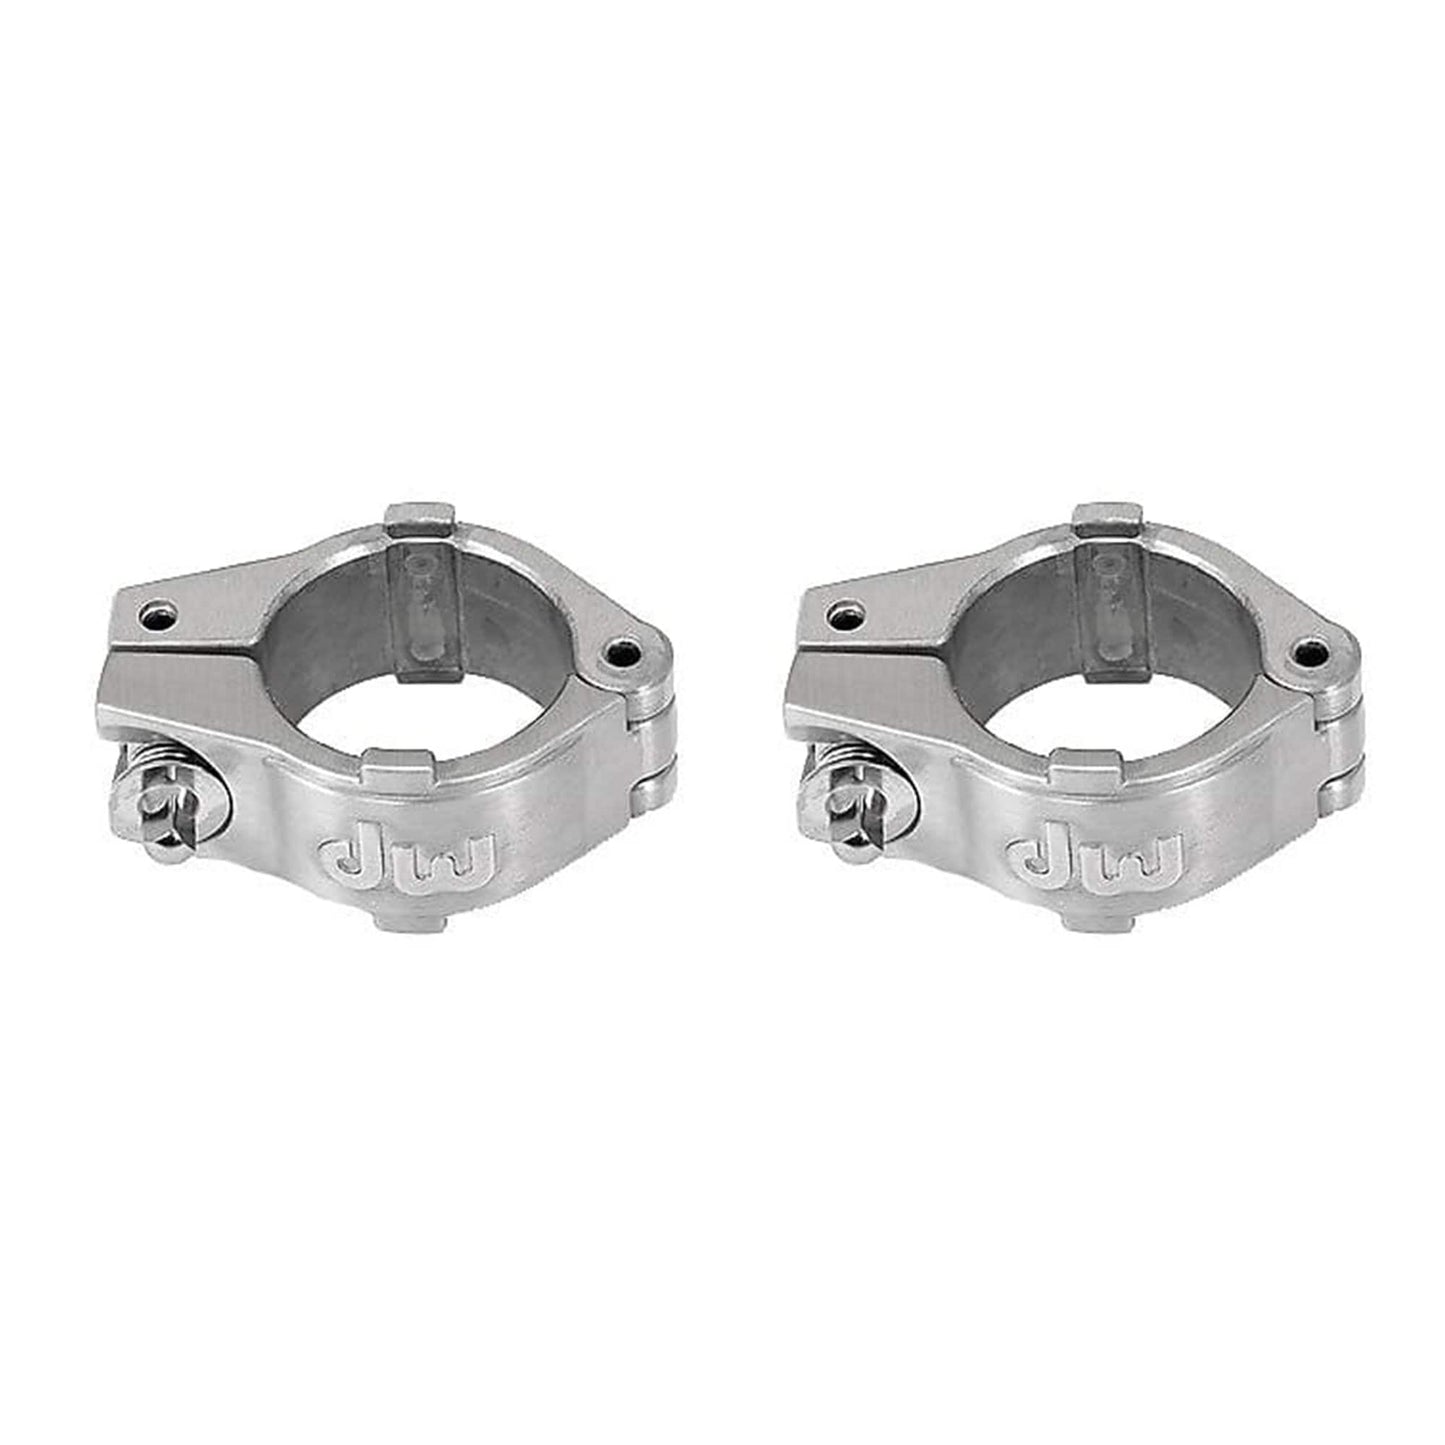 DW Rack 1.5" Hinged Memory Lock (2 Pack Bundle) Drums and Percussion / Parts and Accessories / Drum Parts